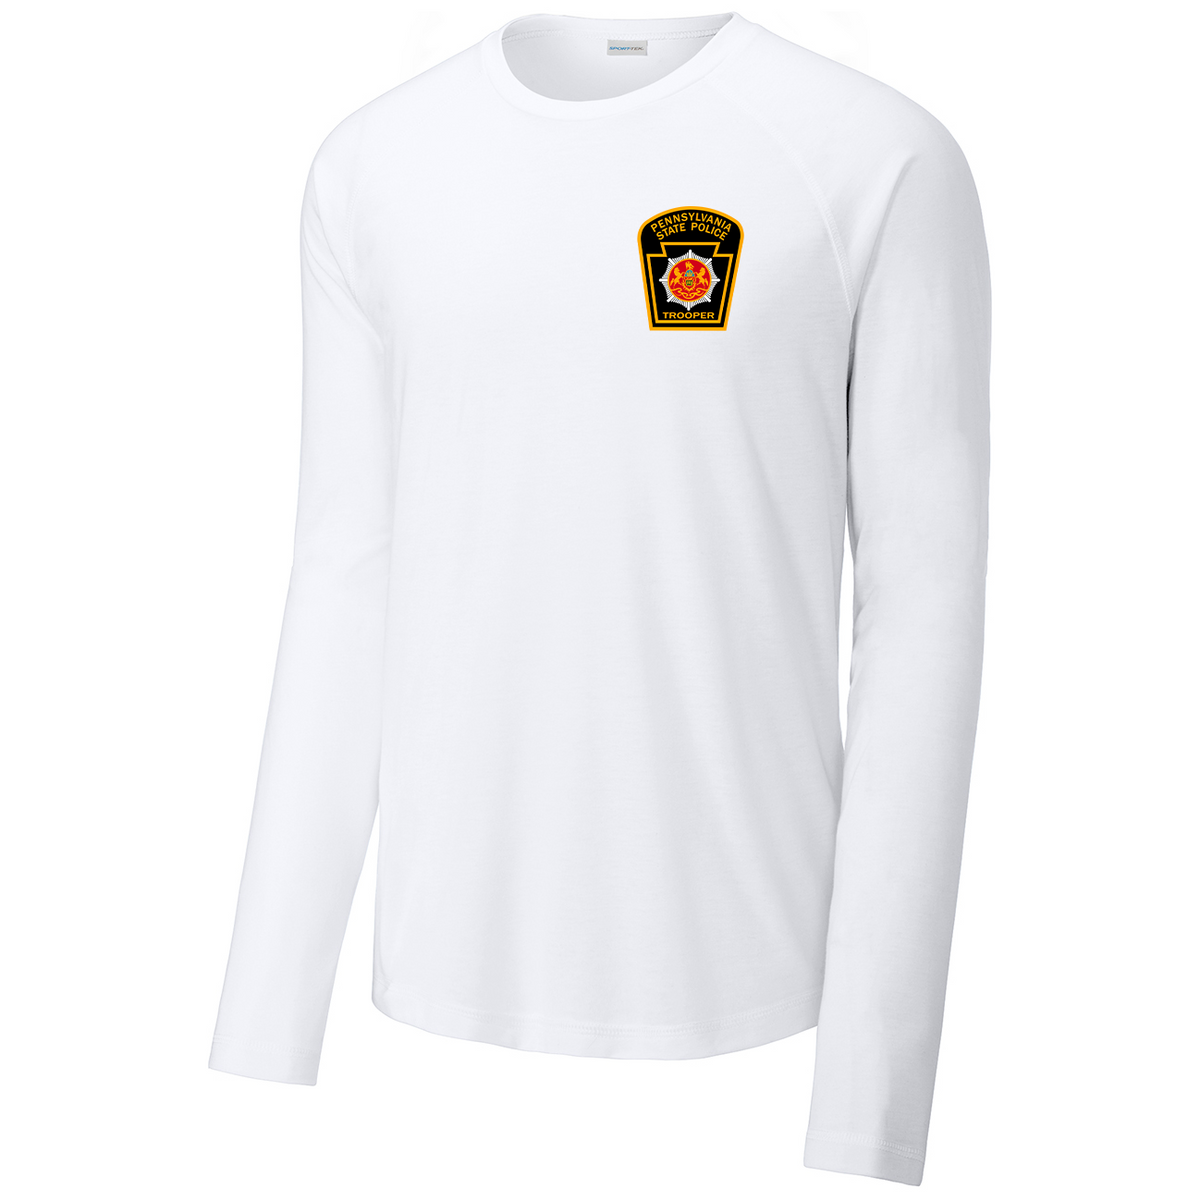 PA State Police Long Sleeve Raglan CottonTouch